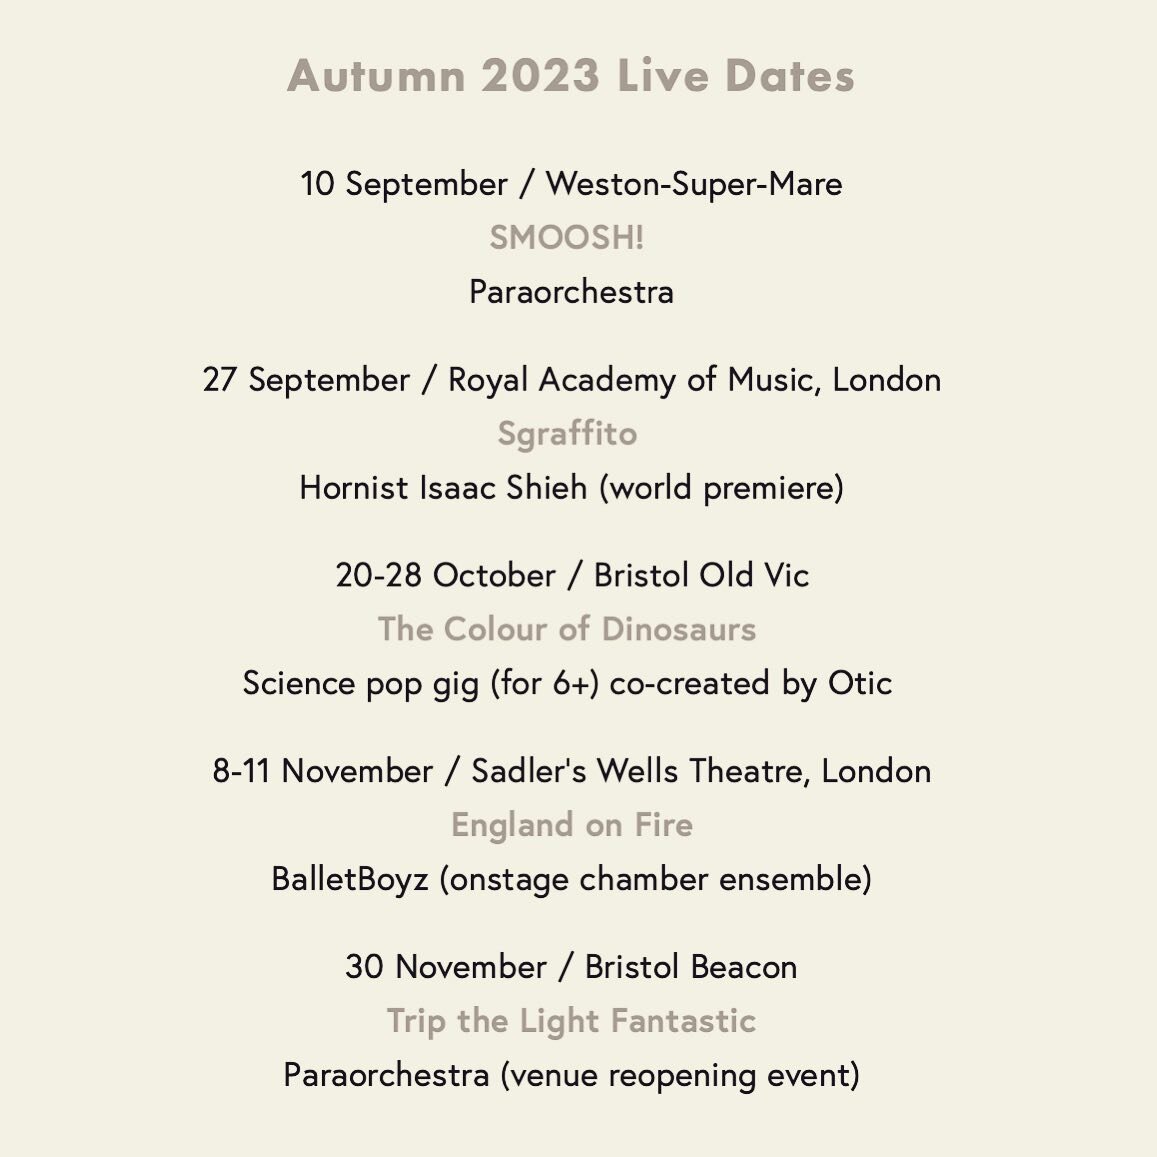 Autumn 2023 live dates - in Weston-super-Mare, Bristol and London! 🎵 

Link in bio to my latest blog on this lot, and how/where to get tickets! 🎟 

@naturally_isaac @paraorchestra @weare_otic @bristololdvic1766 @bristol_beacon @balletboyz